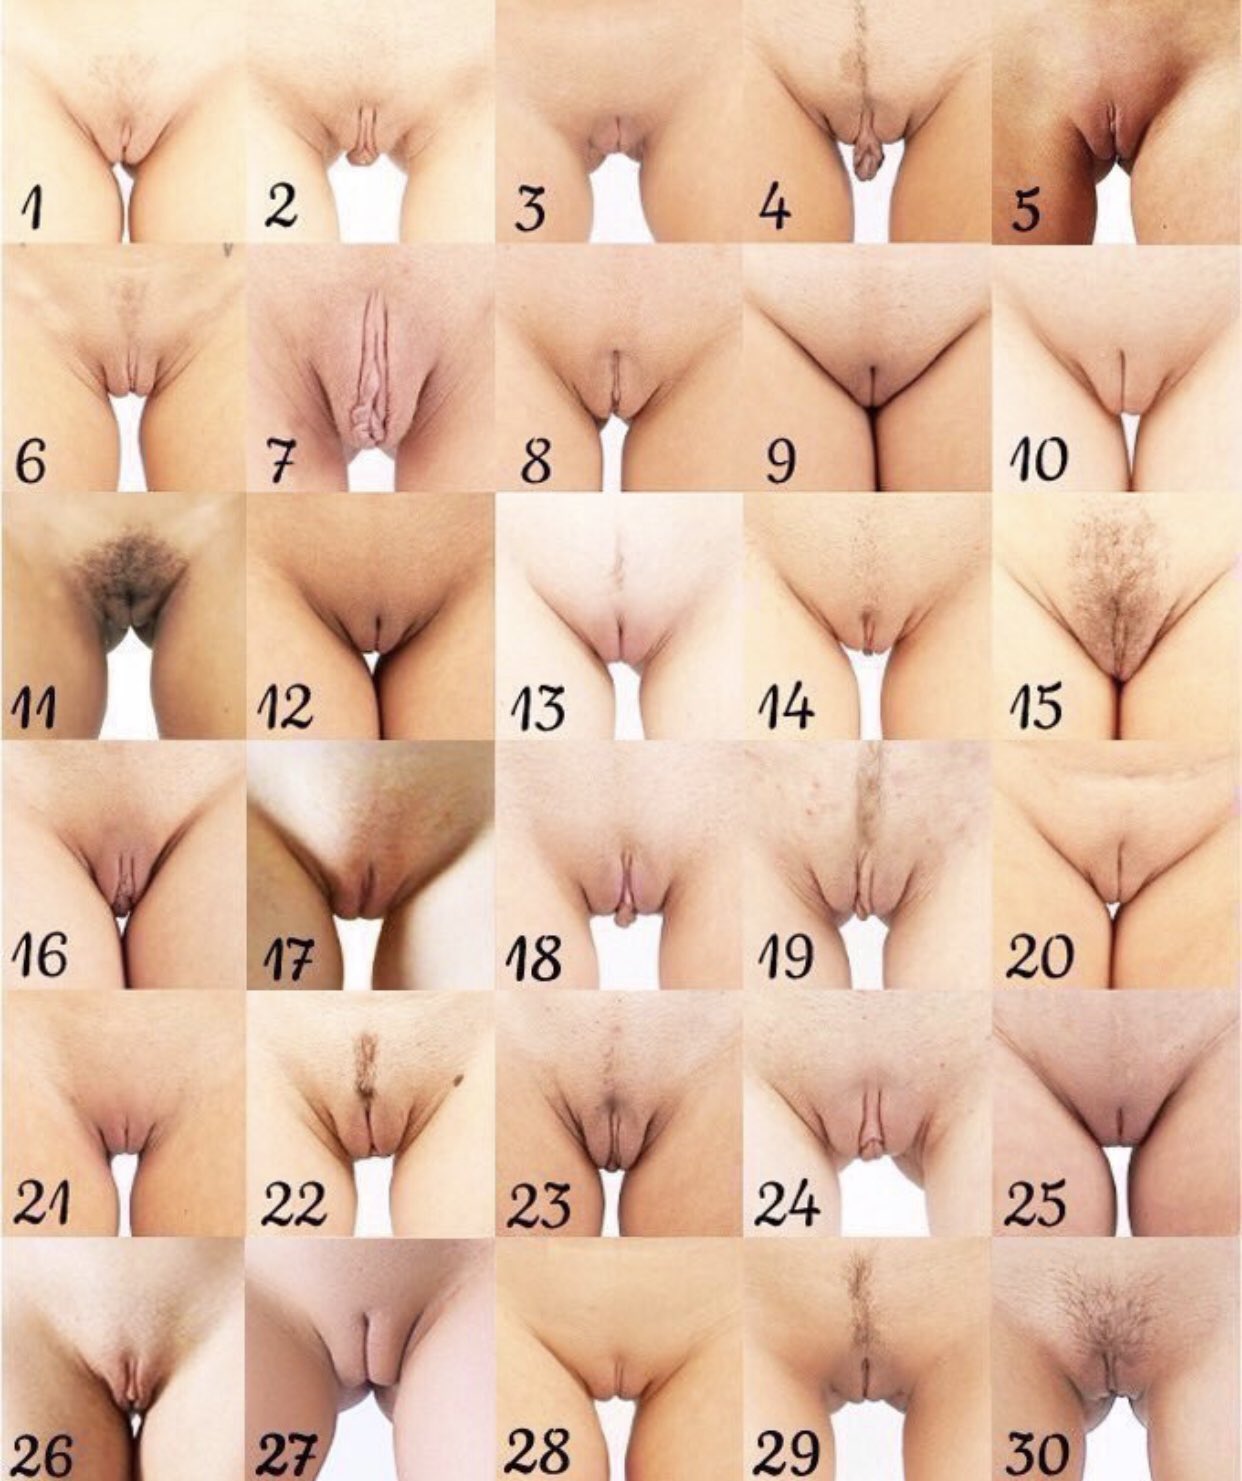 Ladies, which number describes your pussy. 